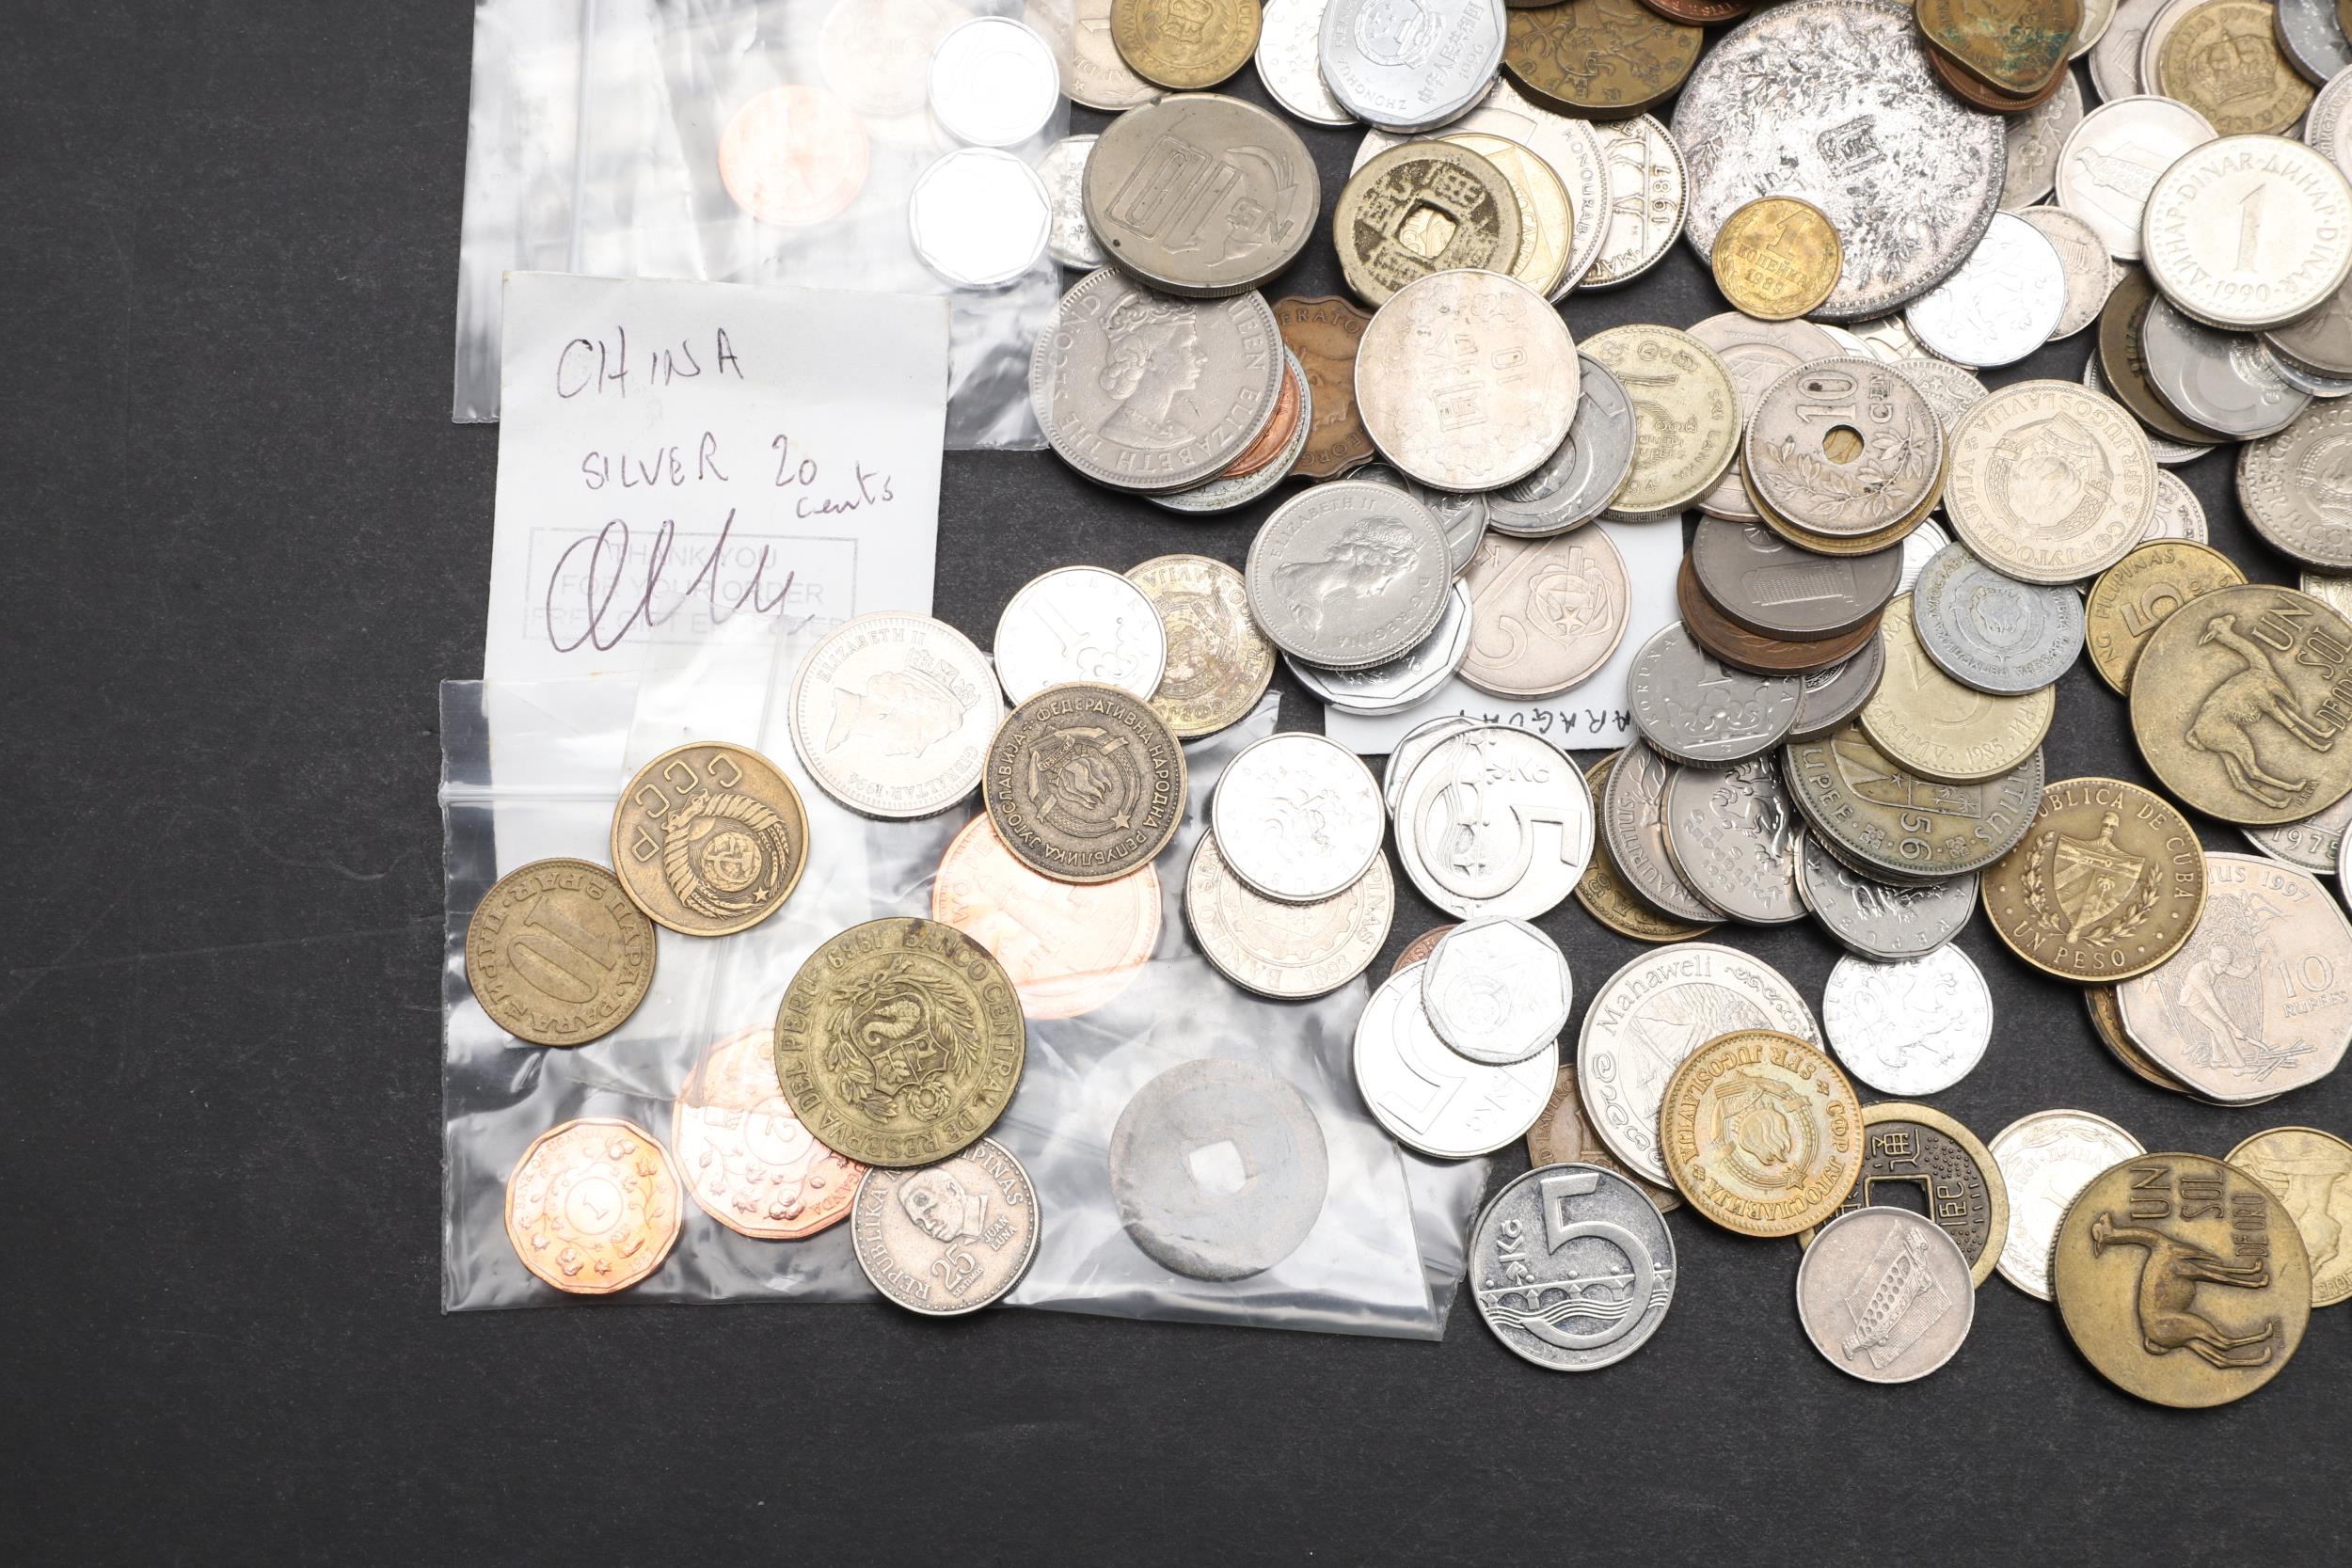 A COLLECTION OF WORLD COINS, VARIOUS COUNTIRES TO INCLUDE MALAYA, CHINA, GIBRALTAR AND MANY OTHERS. - Image 8 of 10